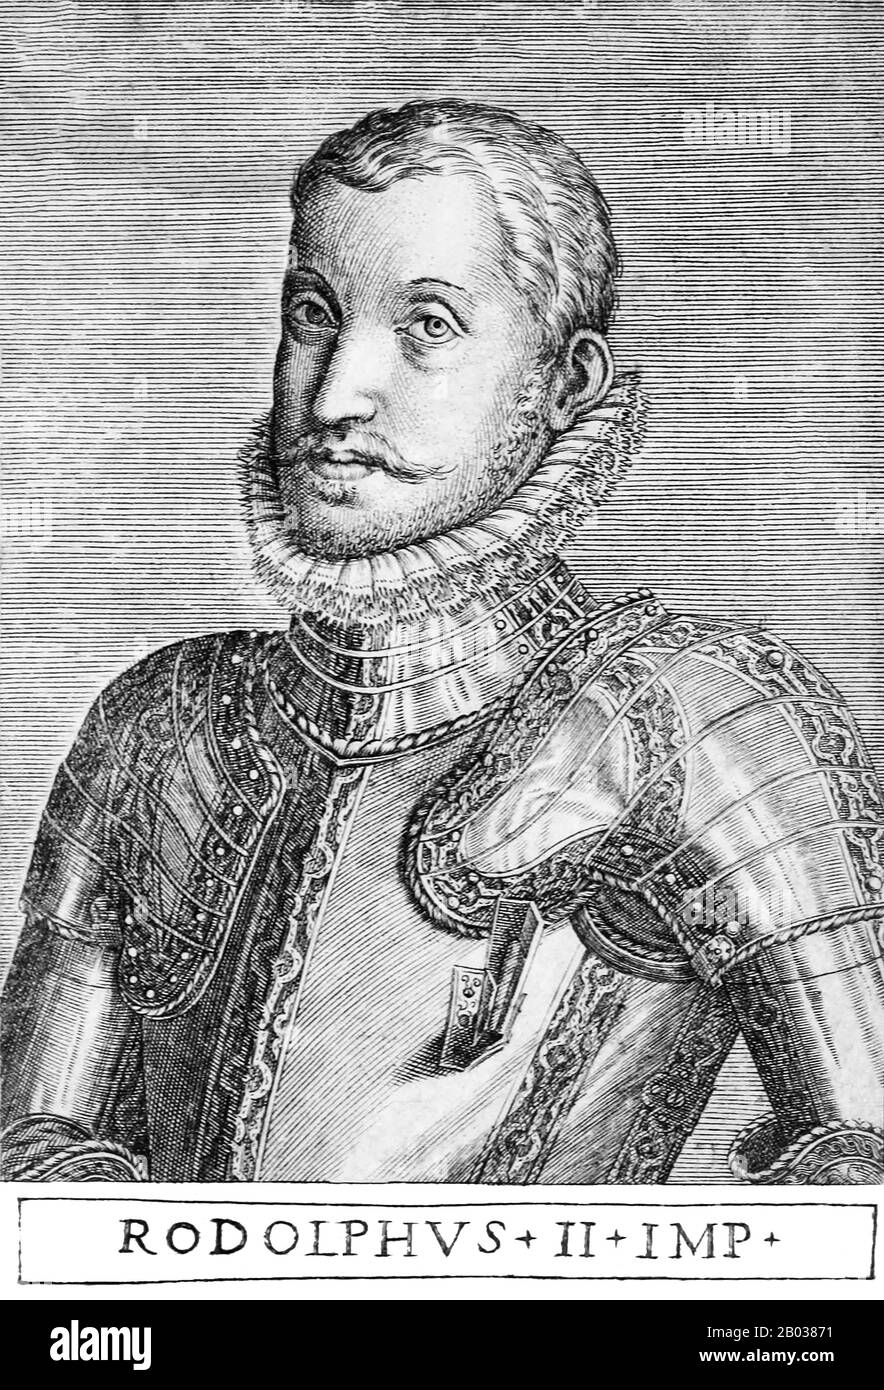 Rudolf II (1552-1612) was the eldest son and successor of Emperor Maximilian II, and spent eight formative years in the Spanish court of his maternal uncle Philip II, adopting a stiff and aloof manner typical of the more conservative Spanish nobility. He remained reserved and secretive for the rest of his life, less inclined to daily affairs of state and more interested in occult studies such as alchemy and astrology.  Rudolf became King of Hungary and Croatia in 1572, and by the time of his father's death in 1576, had also inherited the Bohemian, German and Holy Roman crowns. Rudolf dangled h Stock Photo